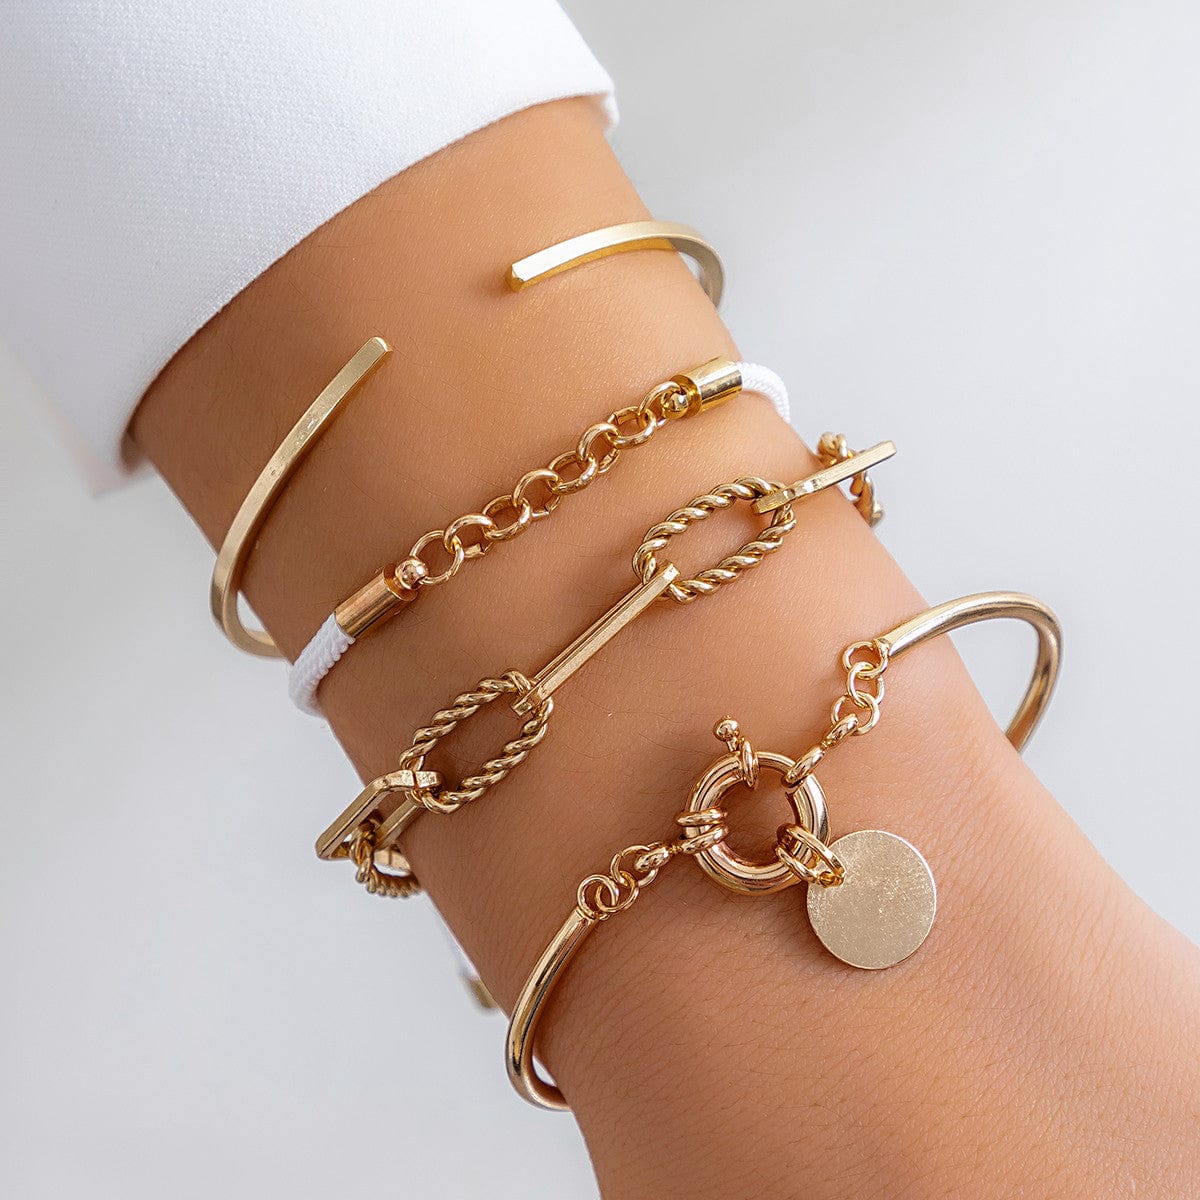 Chic Layered Knotted String Round Disk Cable Chain Bangle Bracelet Set - ArtGalleryZen